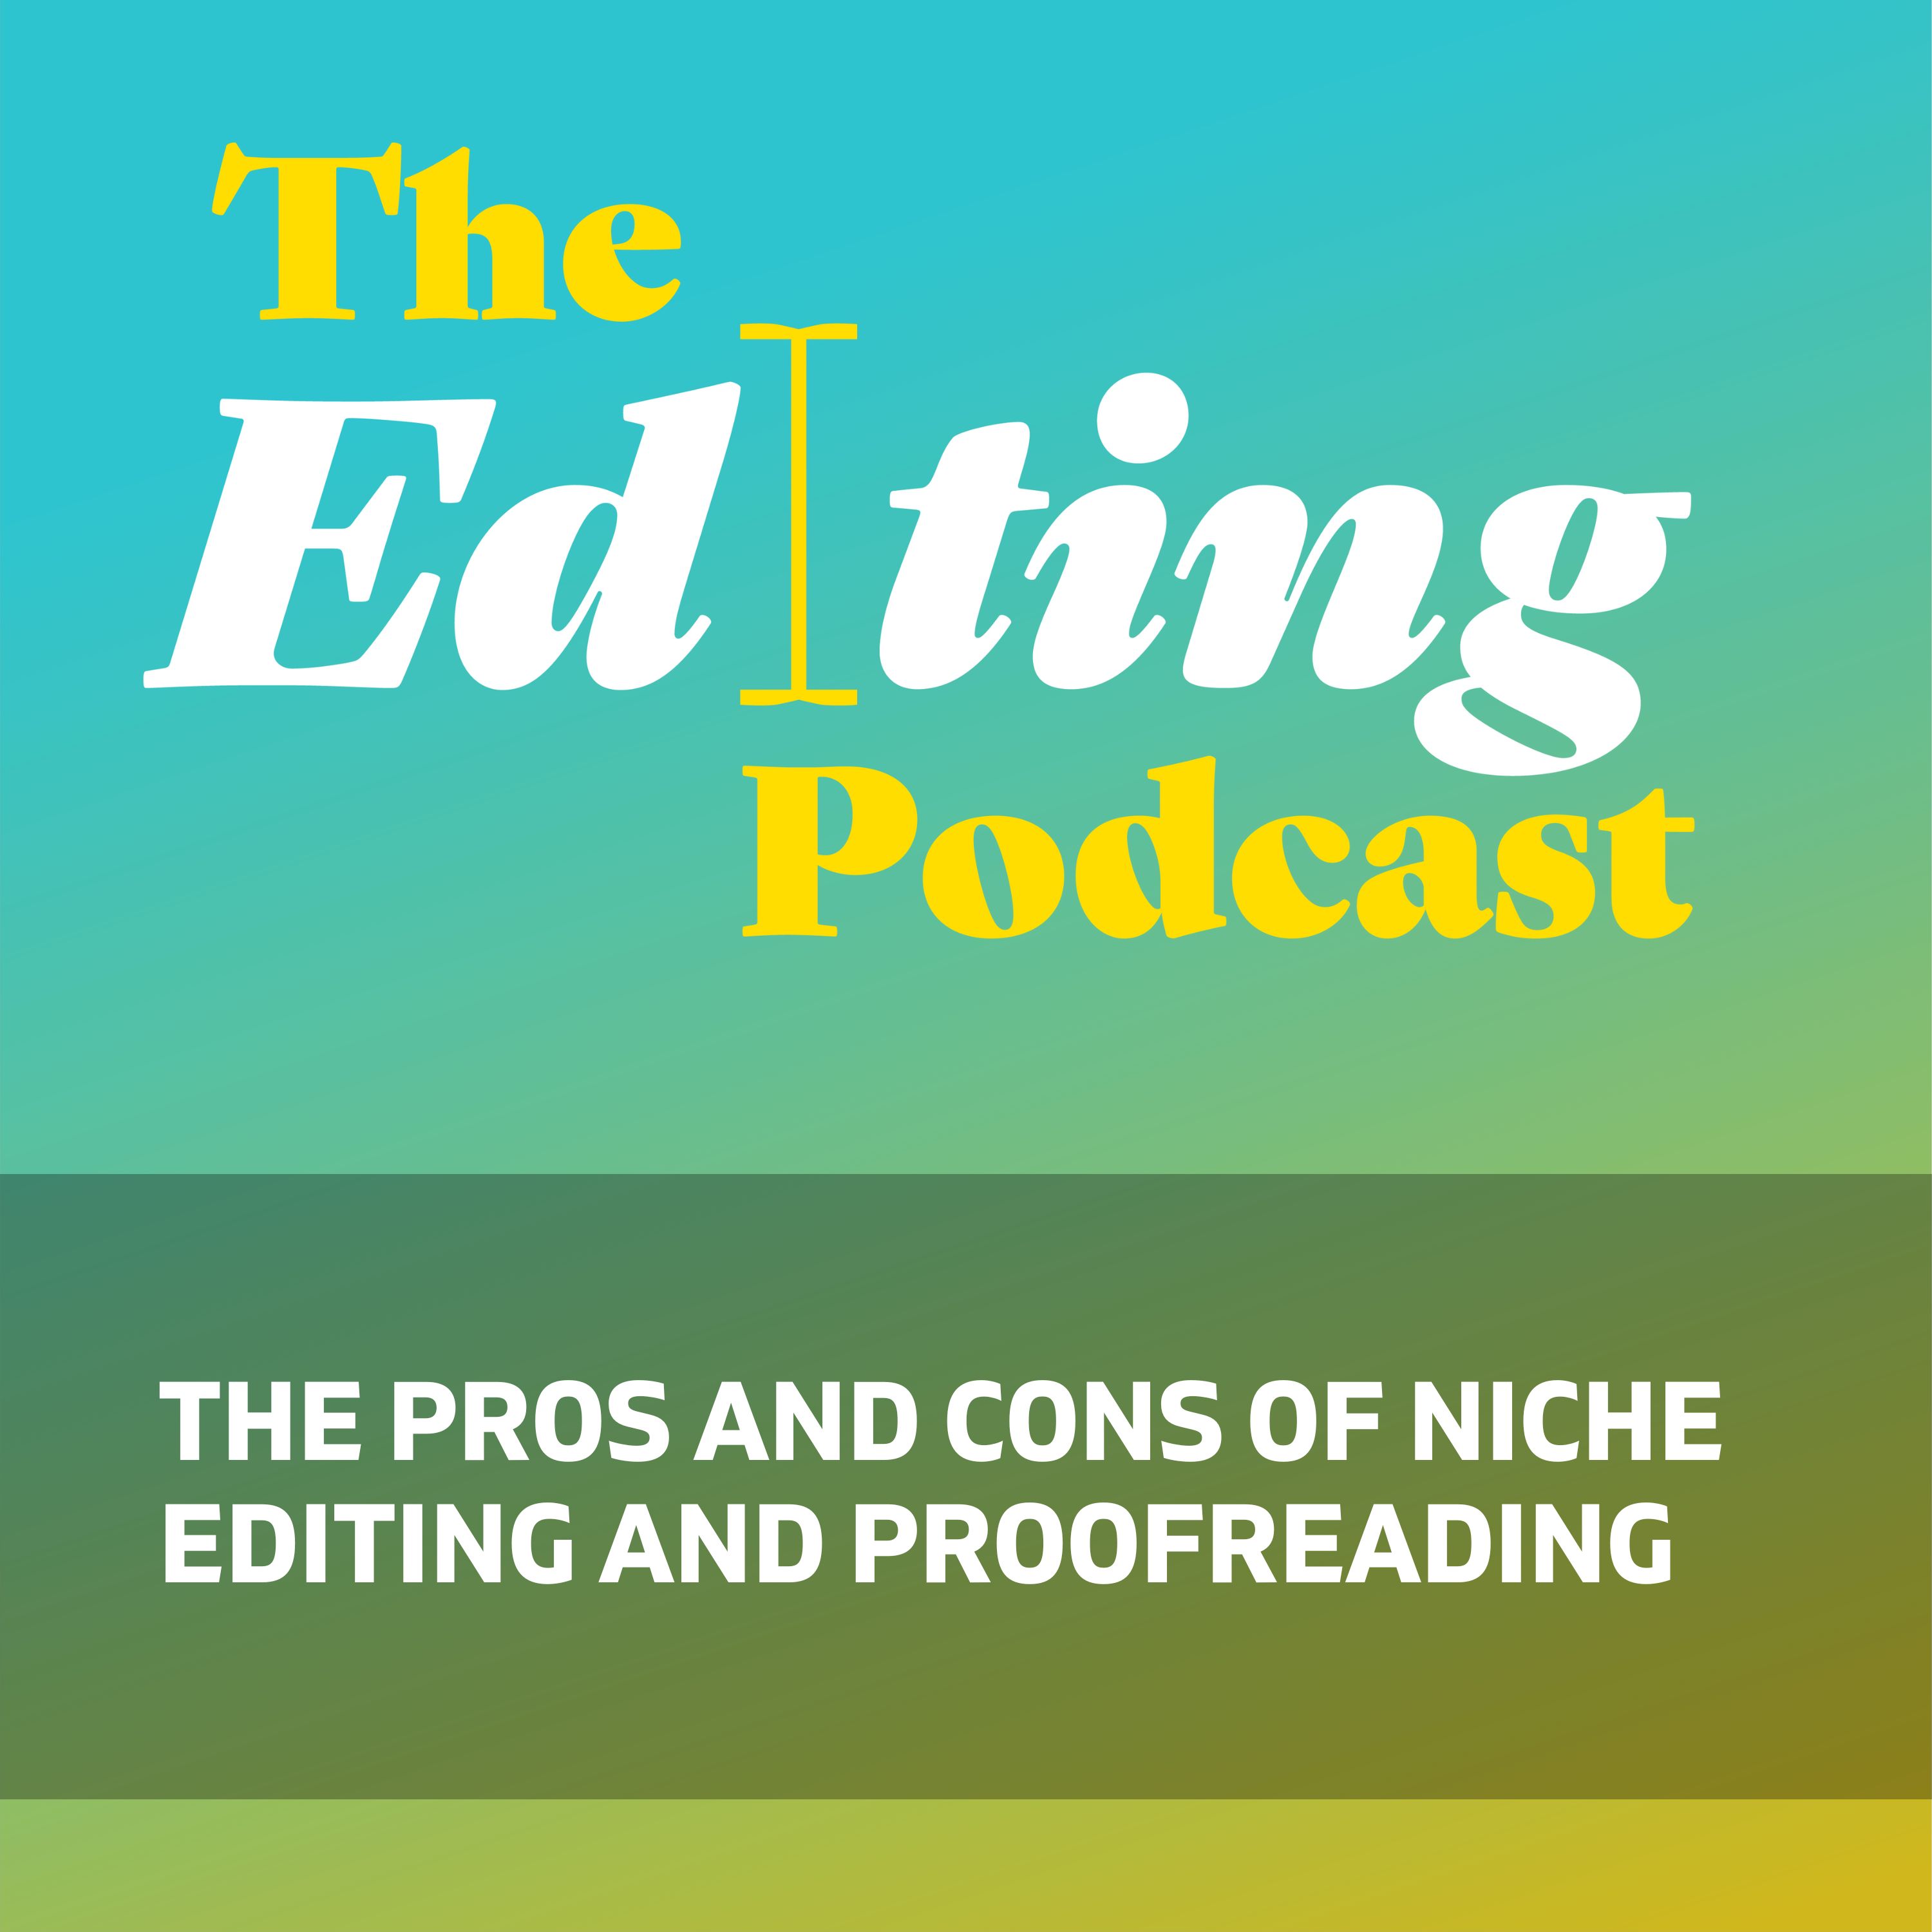 The pros and cons of niche editing and proofreading